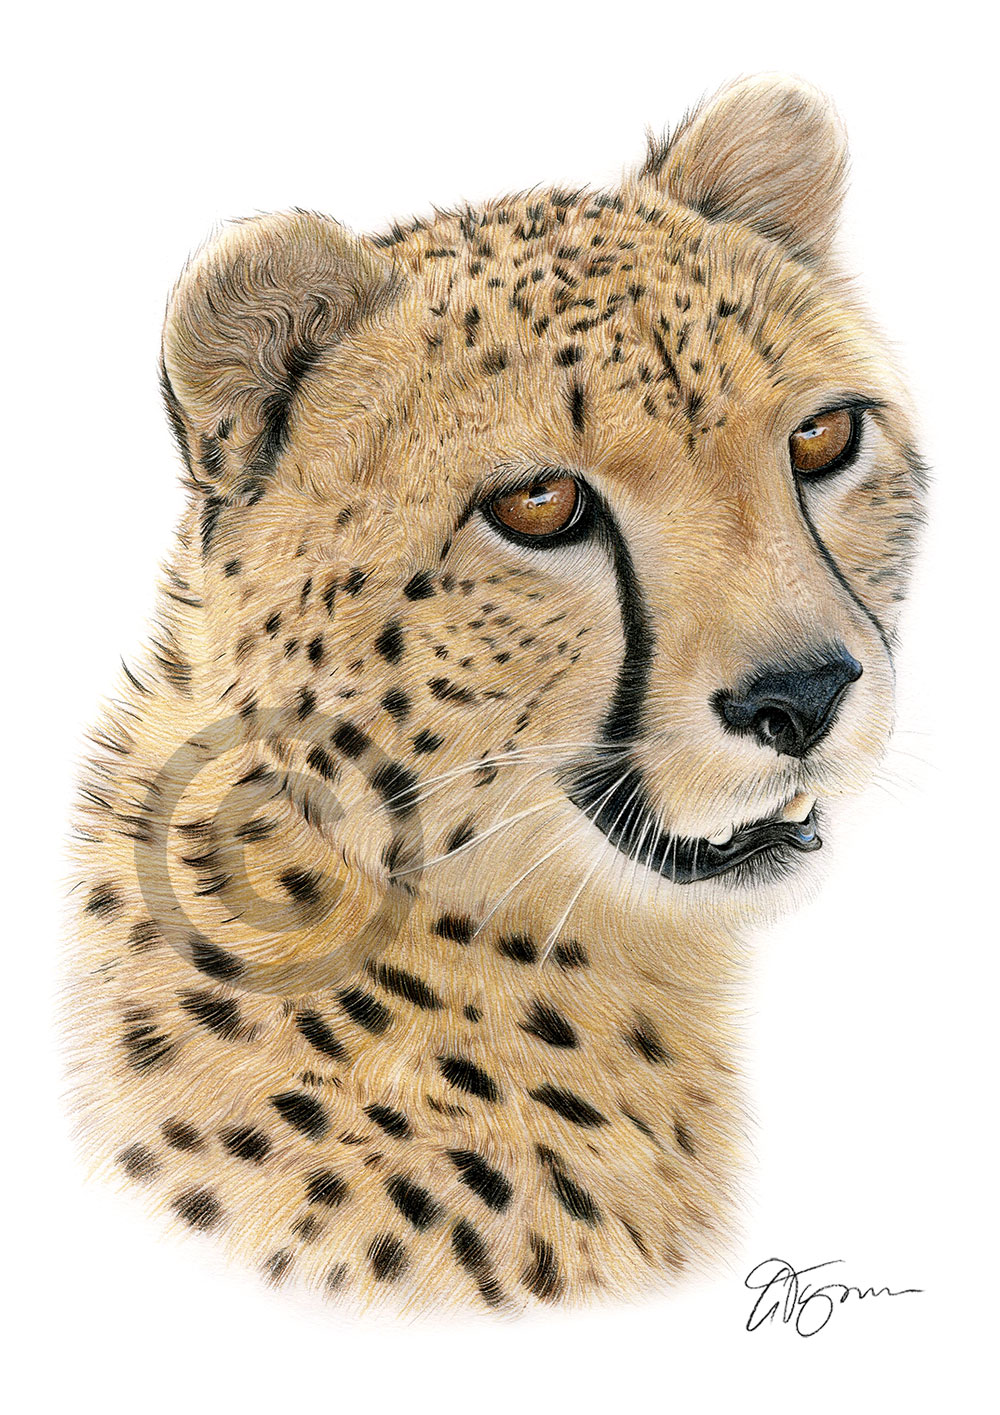 Colour pencil drawing of an African cheetah by UK artist Gary Tymon